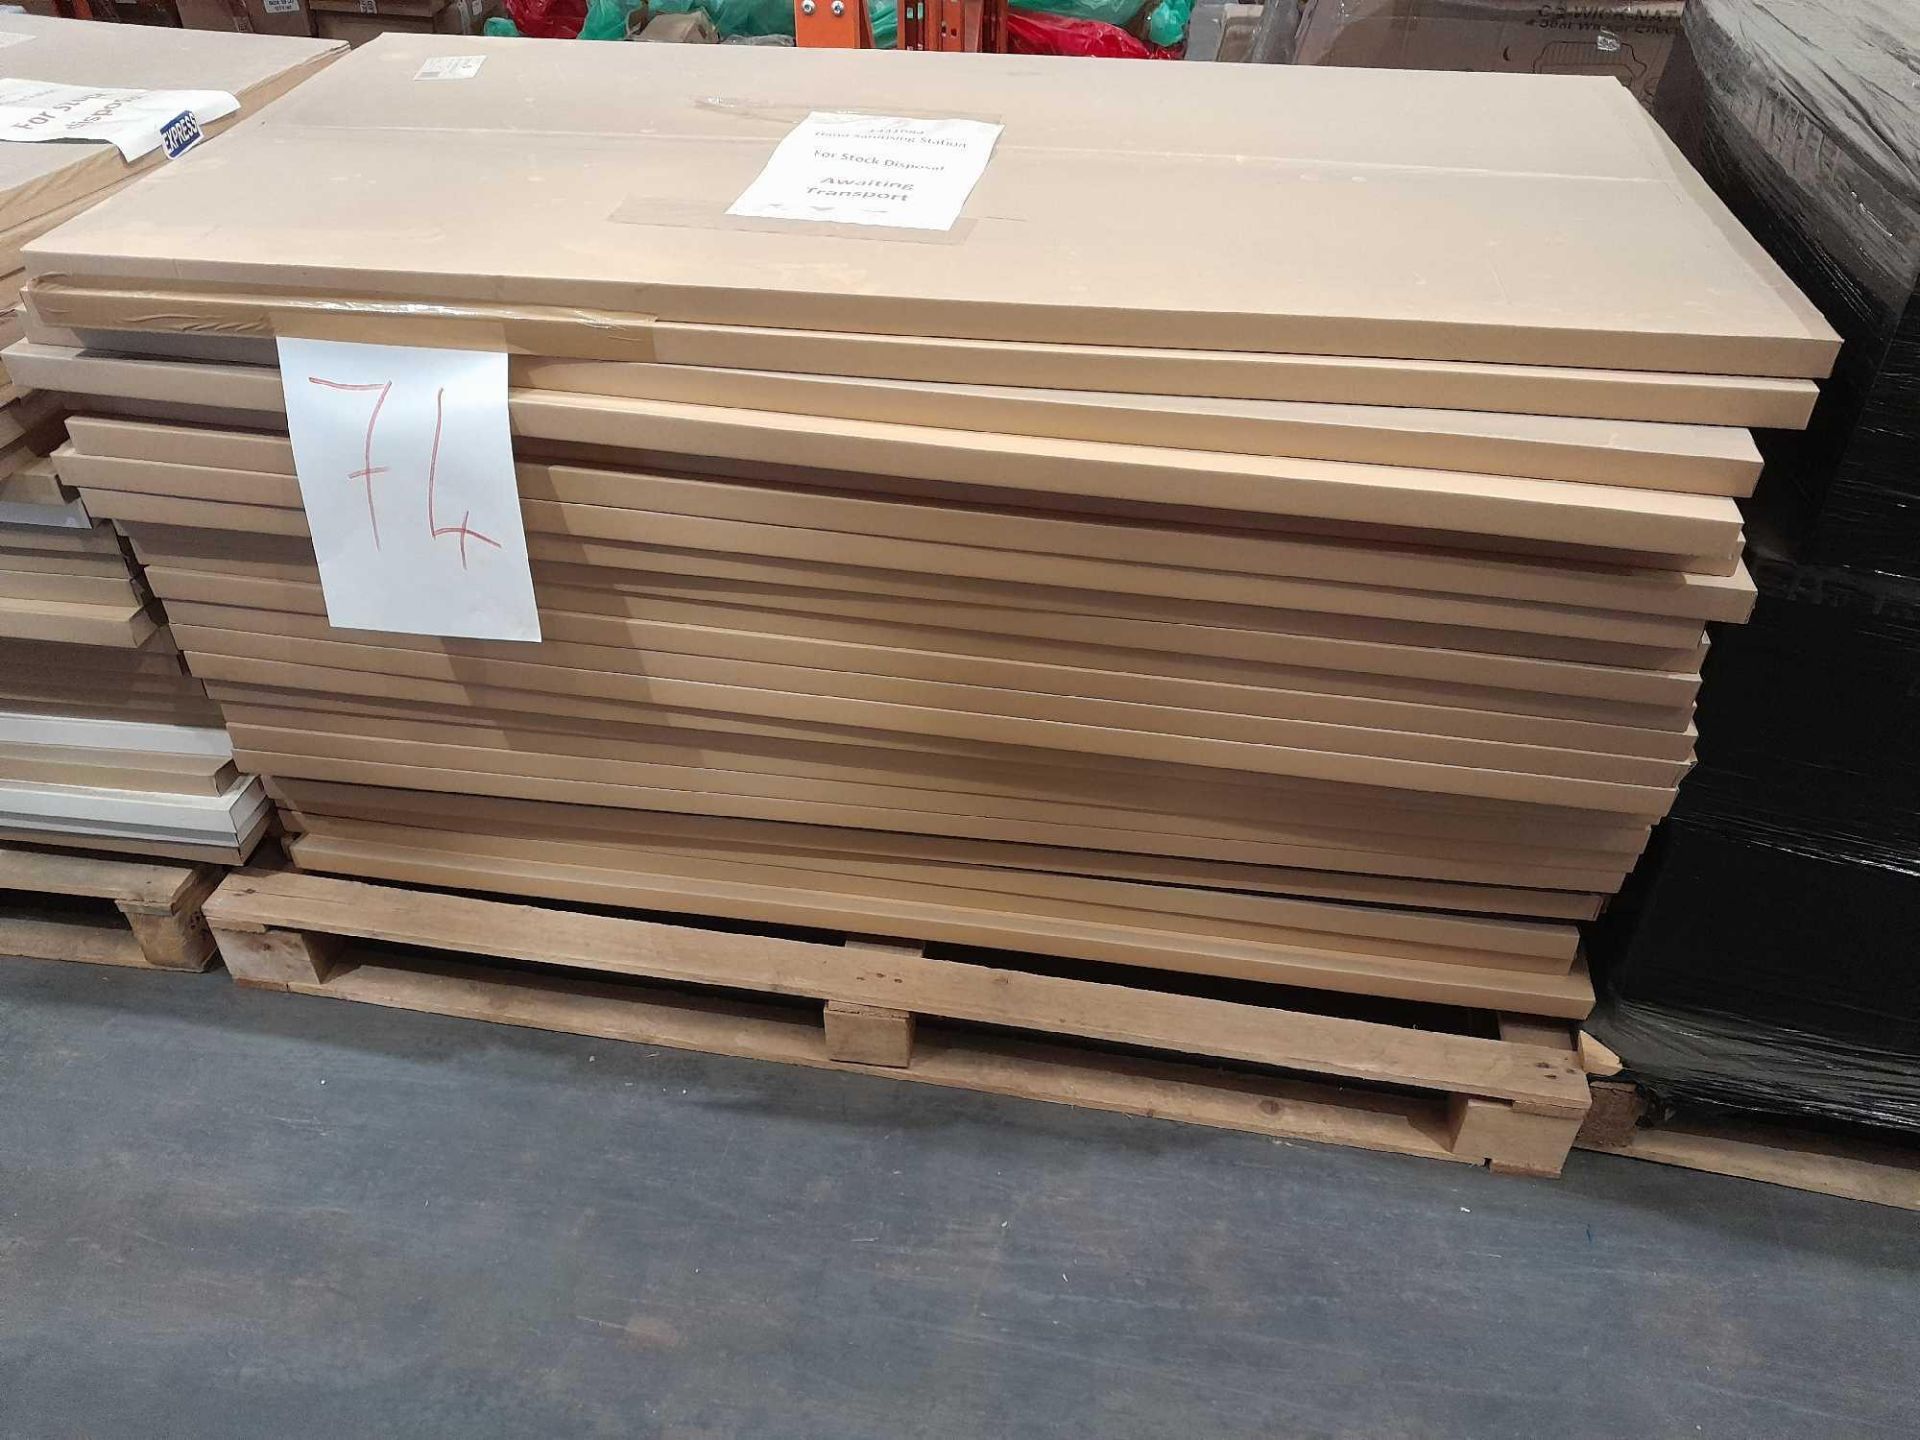 RRP £5,500 Pallet To Contain Hand Sanitisers Stations.(Pictures Are For Illustration Purposes)